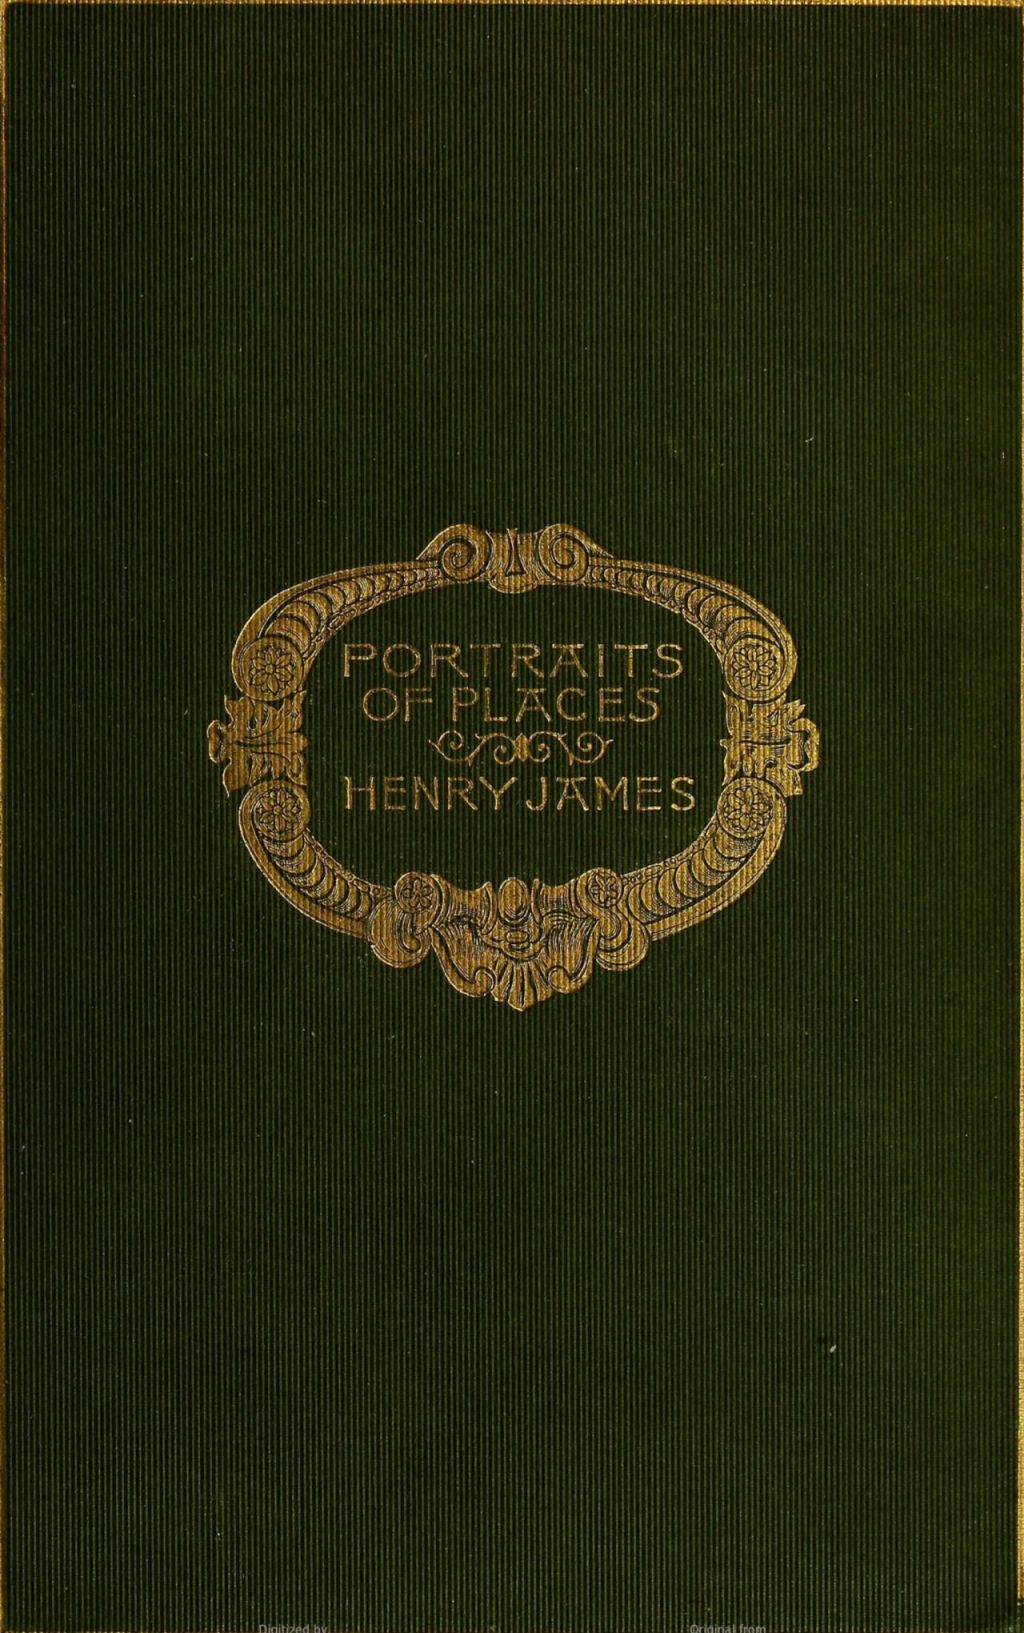 The Project Gutenberg eBook of Portraits of places, by Henry James. photo image